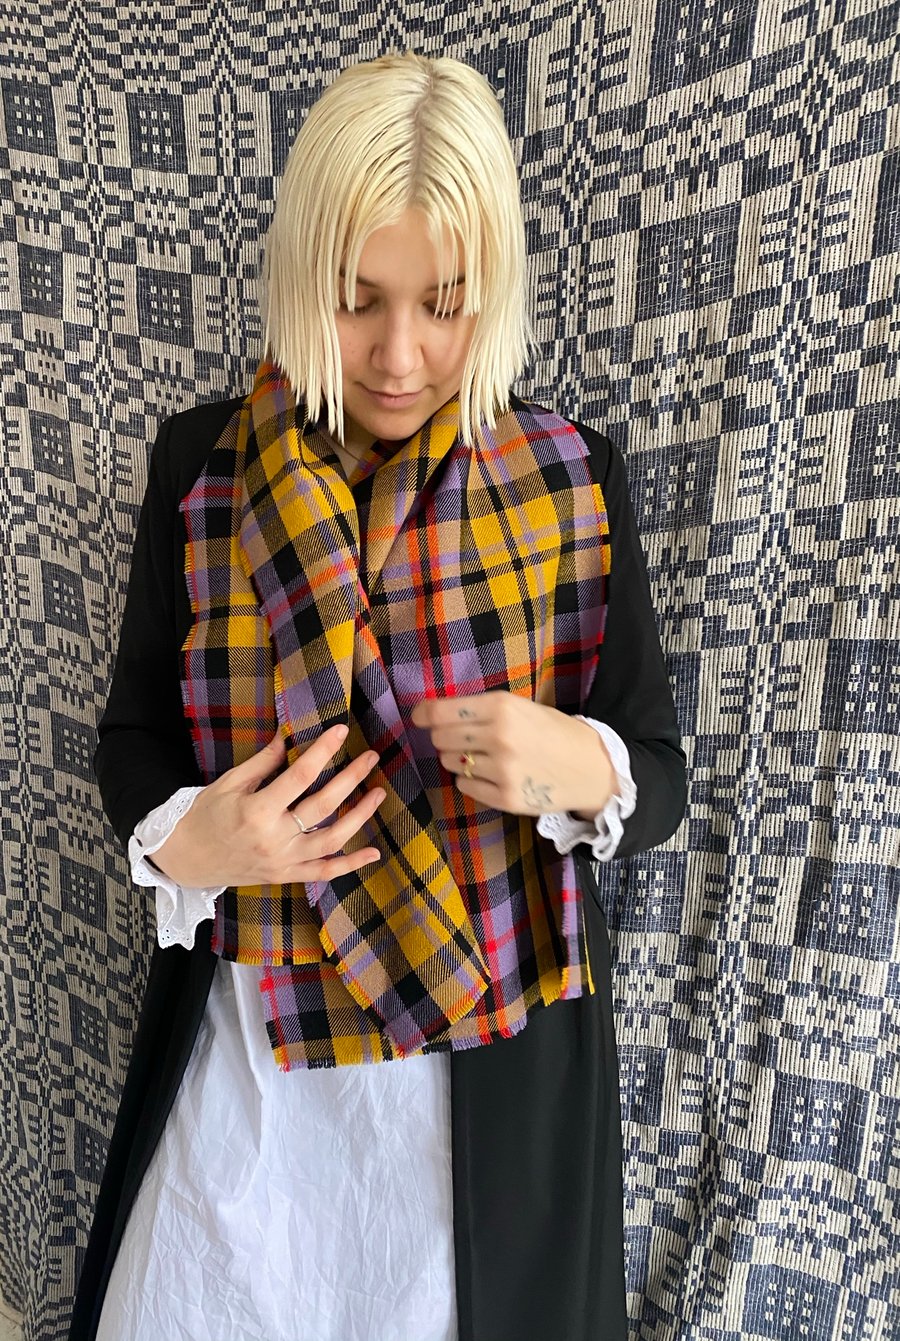 Image of Handwoven Tartan Scarf in Spinster